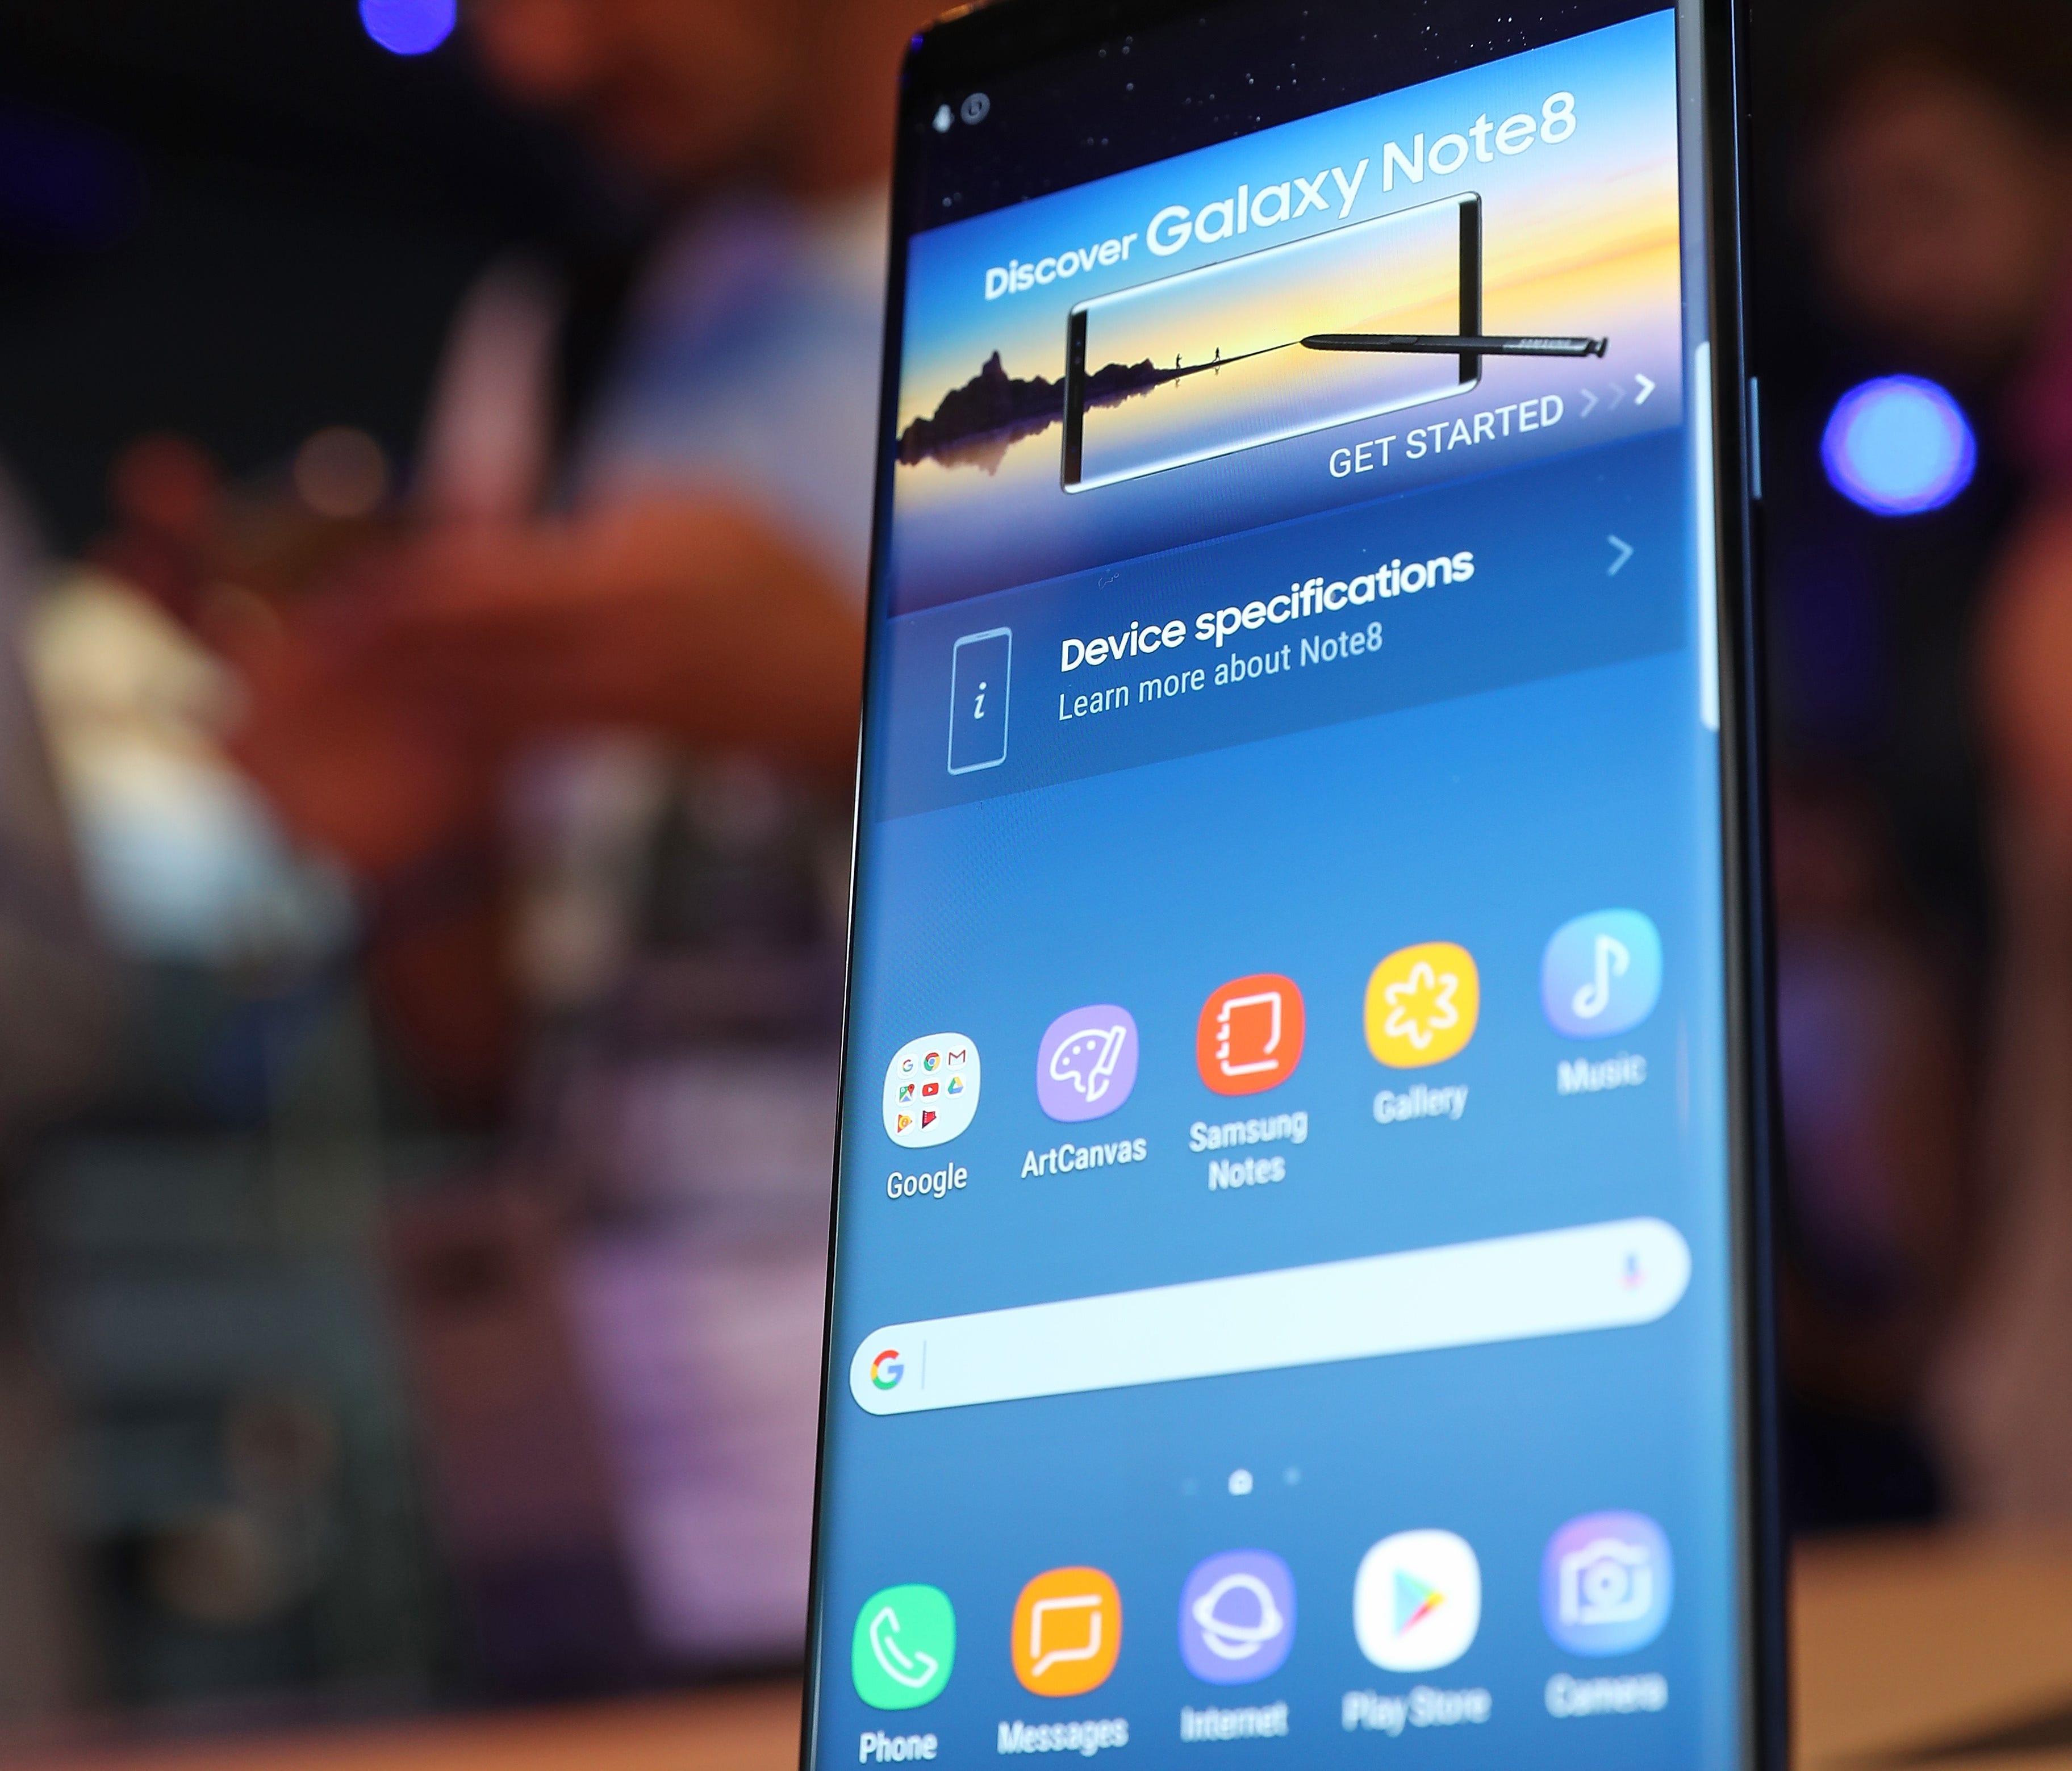 Galaxy Note8 smartphone at is shown off in Berlin, Germany.